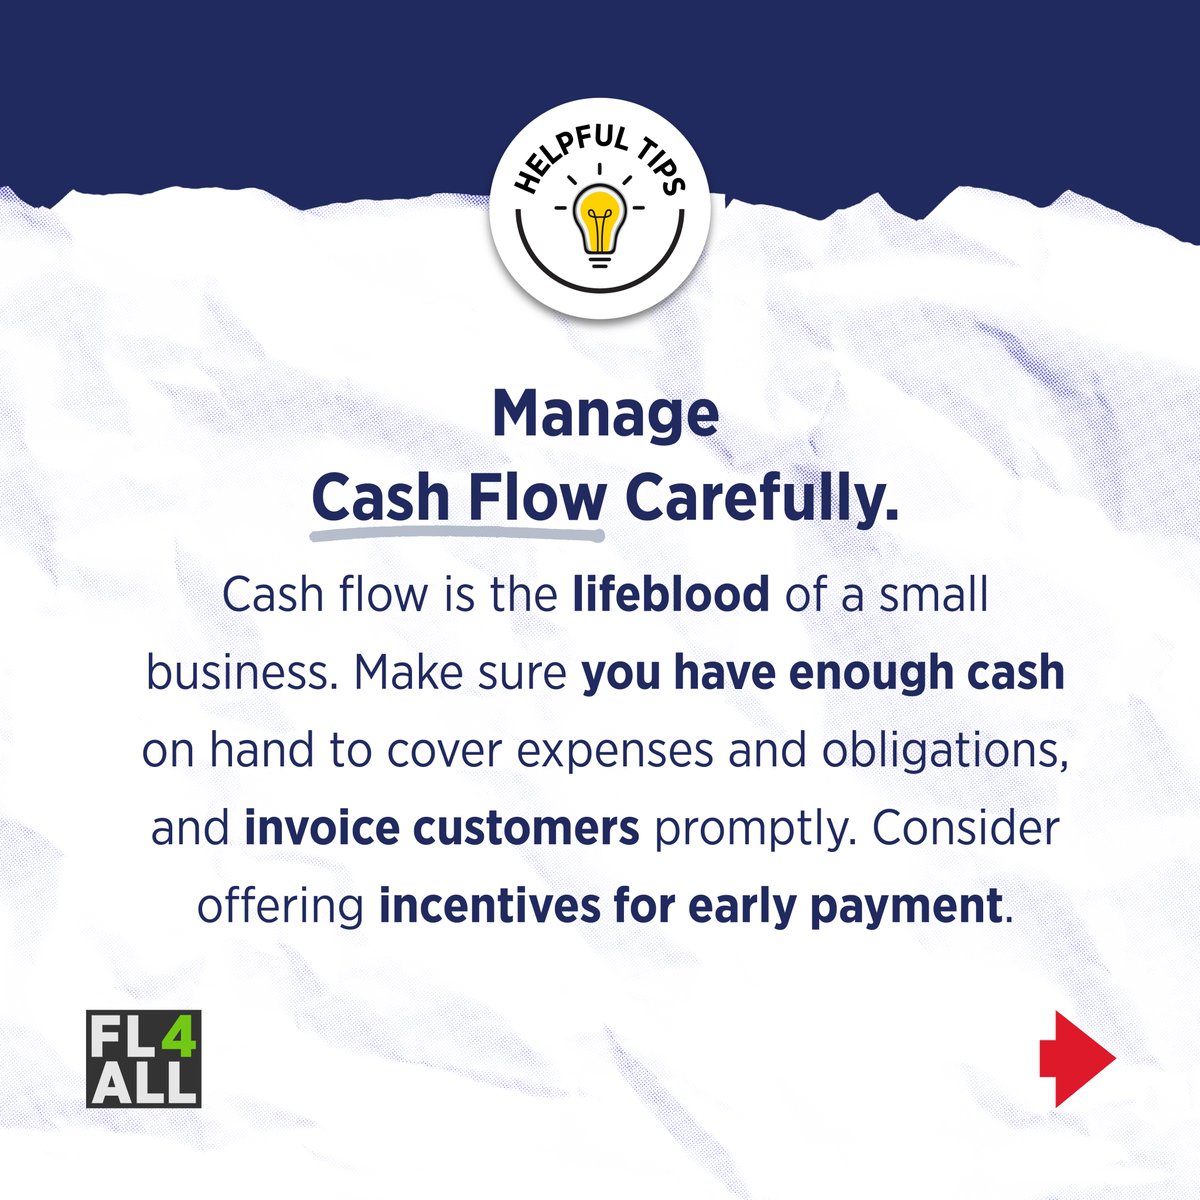 🚨 Financial Tip of the Day: Manage cash flow carefully!
Set a solid invoicing system, encourage early payments with attractive incentives, and regularly review your cash flow statements. 

Remember, a well-managed cash flow keeps your business agile and ready for anything!